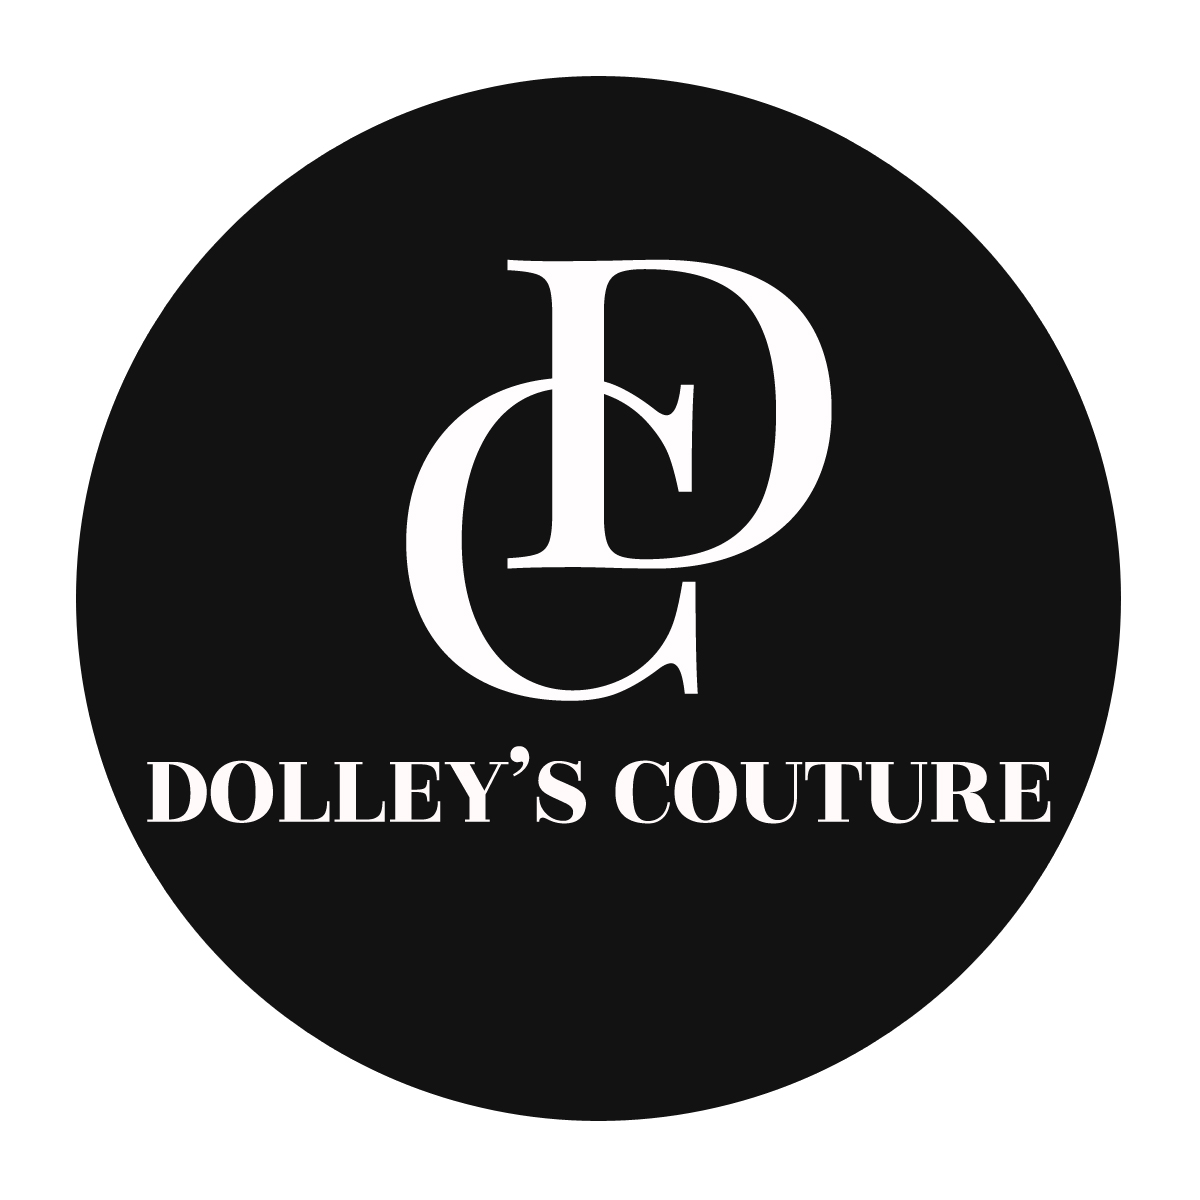 Dolleys Couture